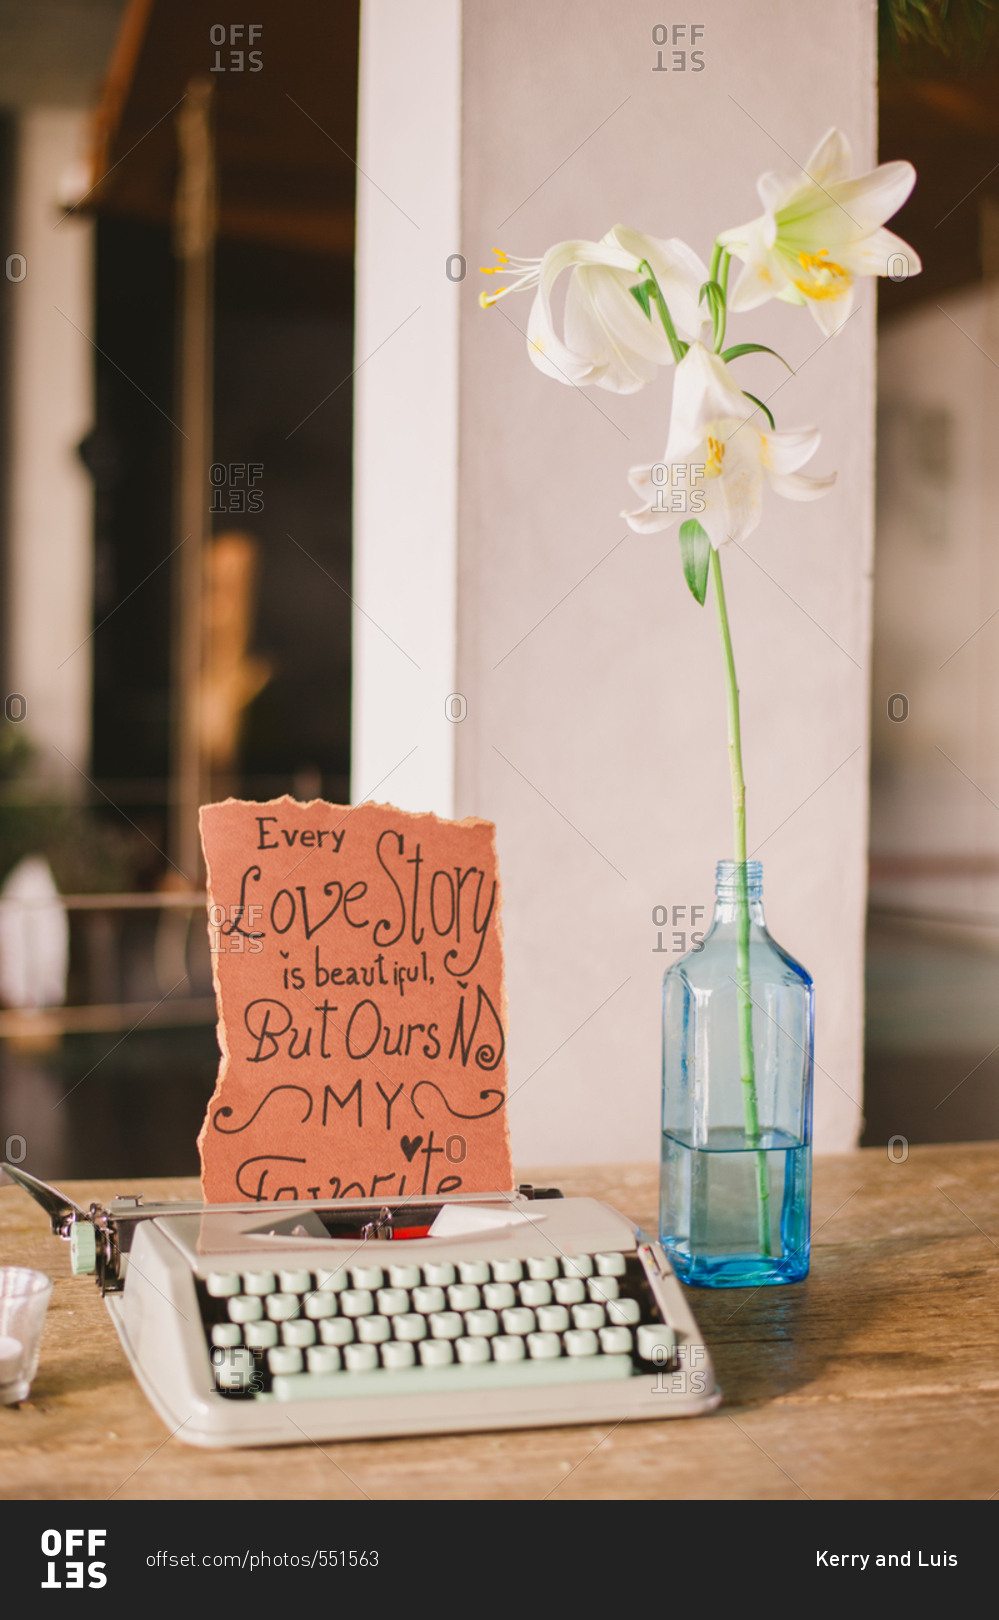 Retro typewriter with handwritten sign and flower in a glass bottle